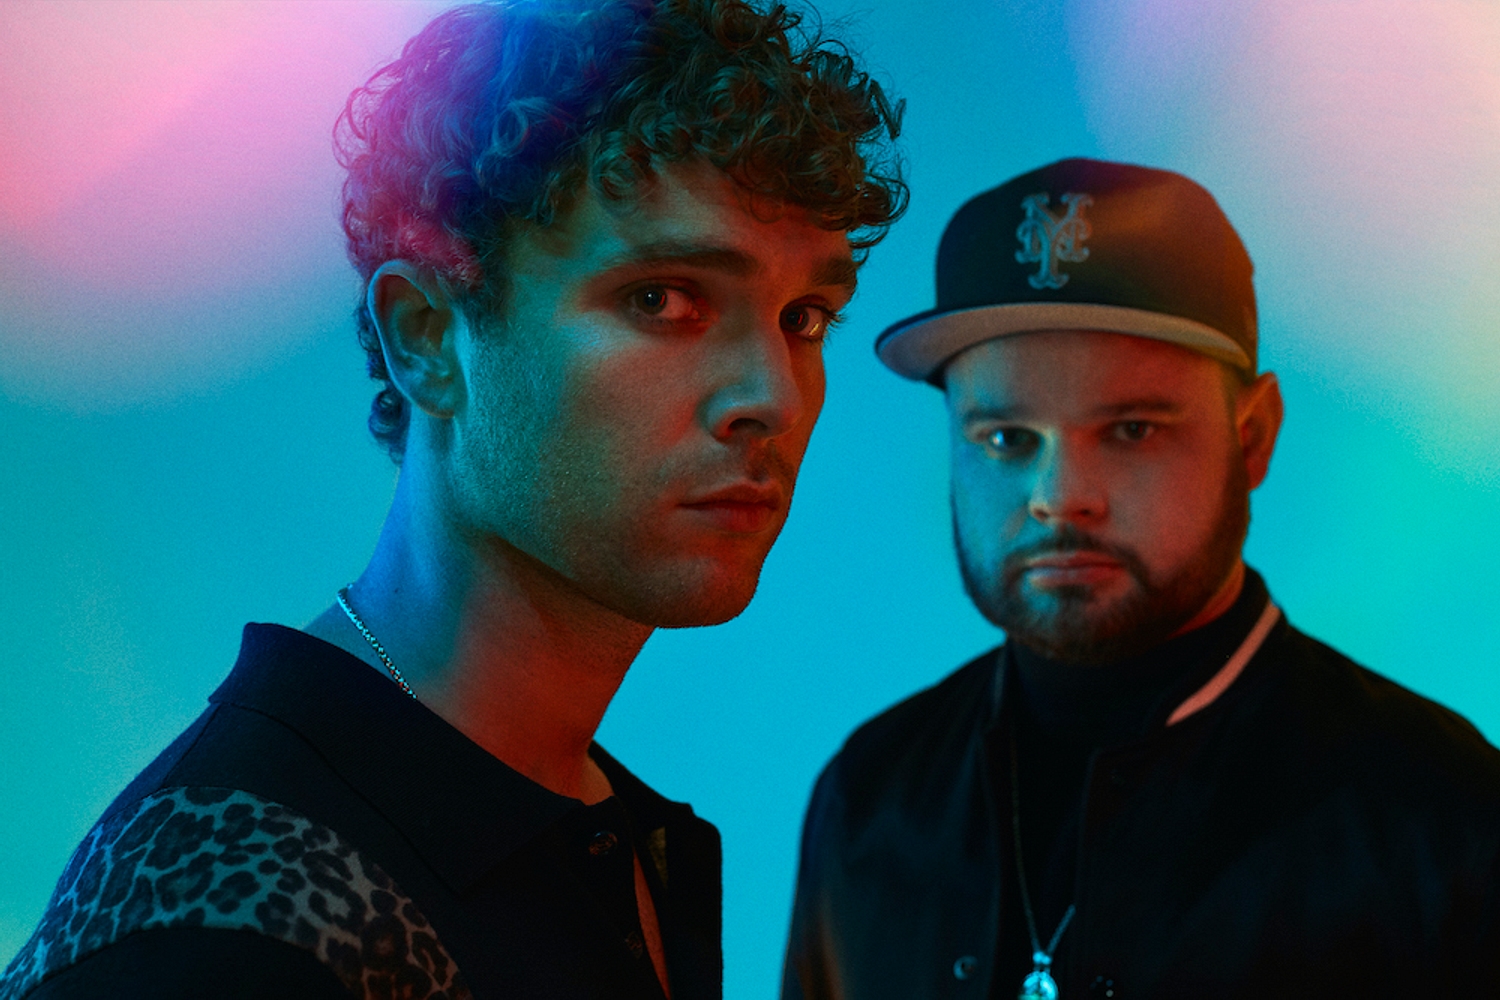 Royal Blood unleash ‘Trouble’s Coming’ video